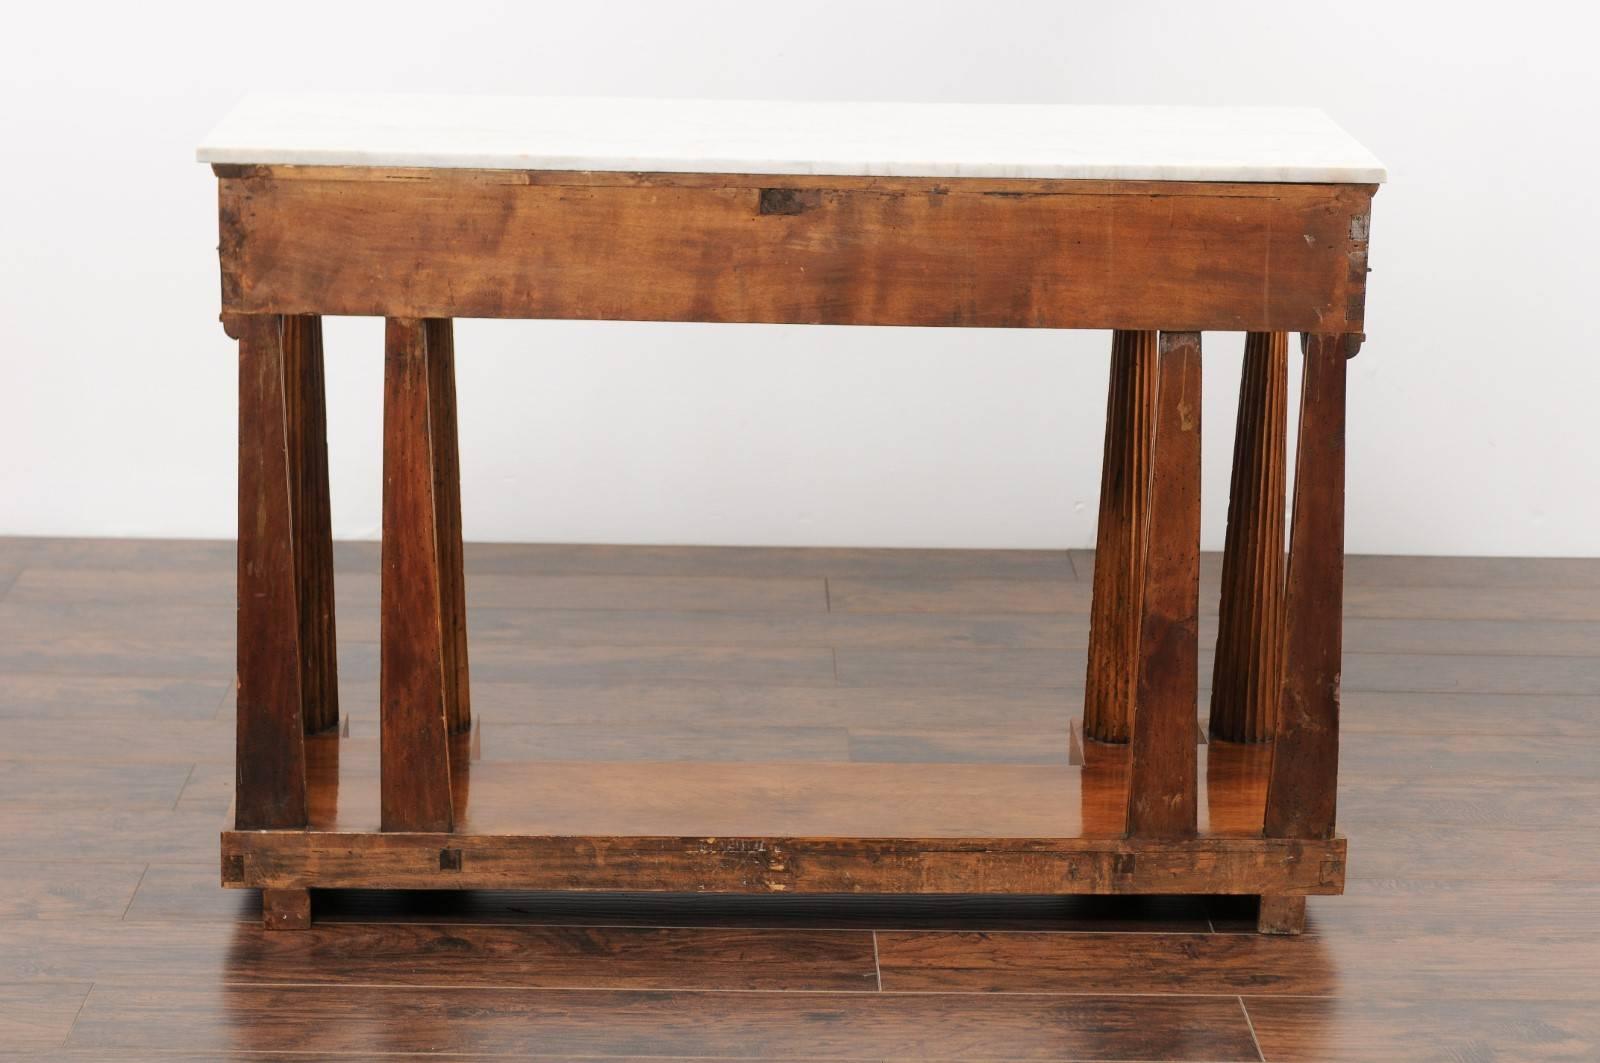 Italian, 1850s Walnut Veneered Console Table with Marble Top and Column Legs 1